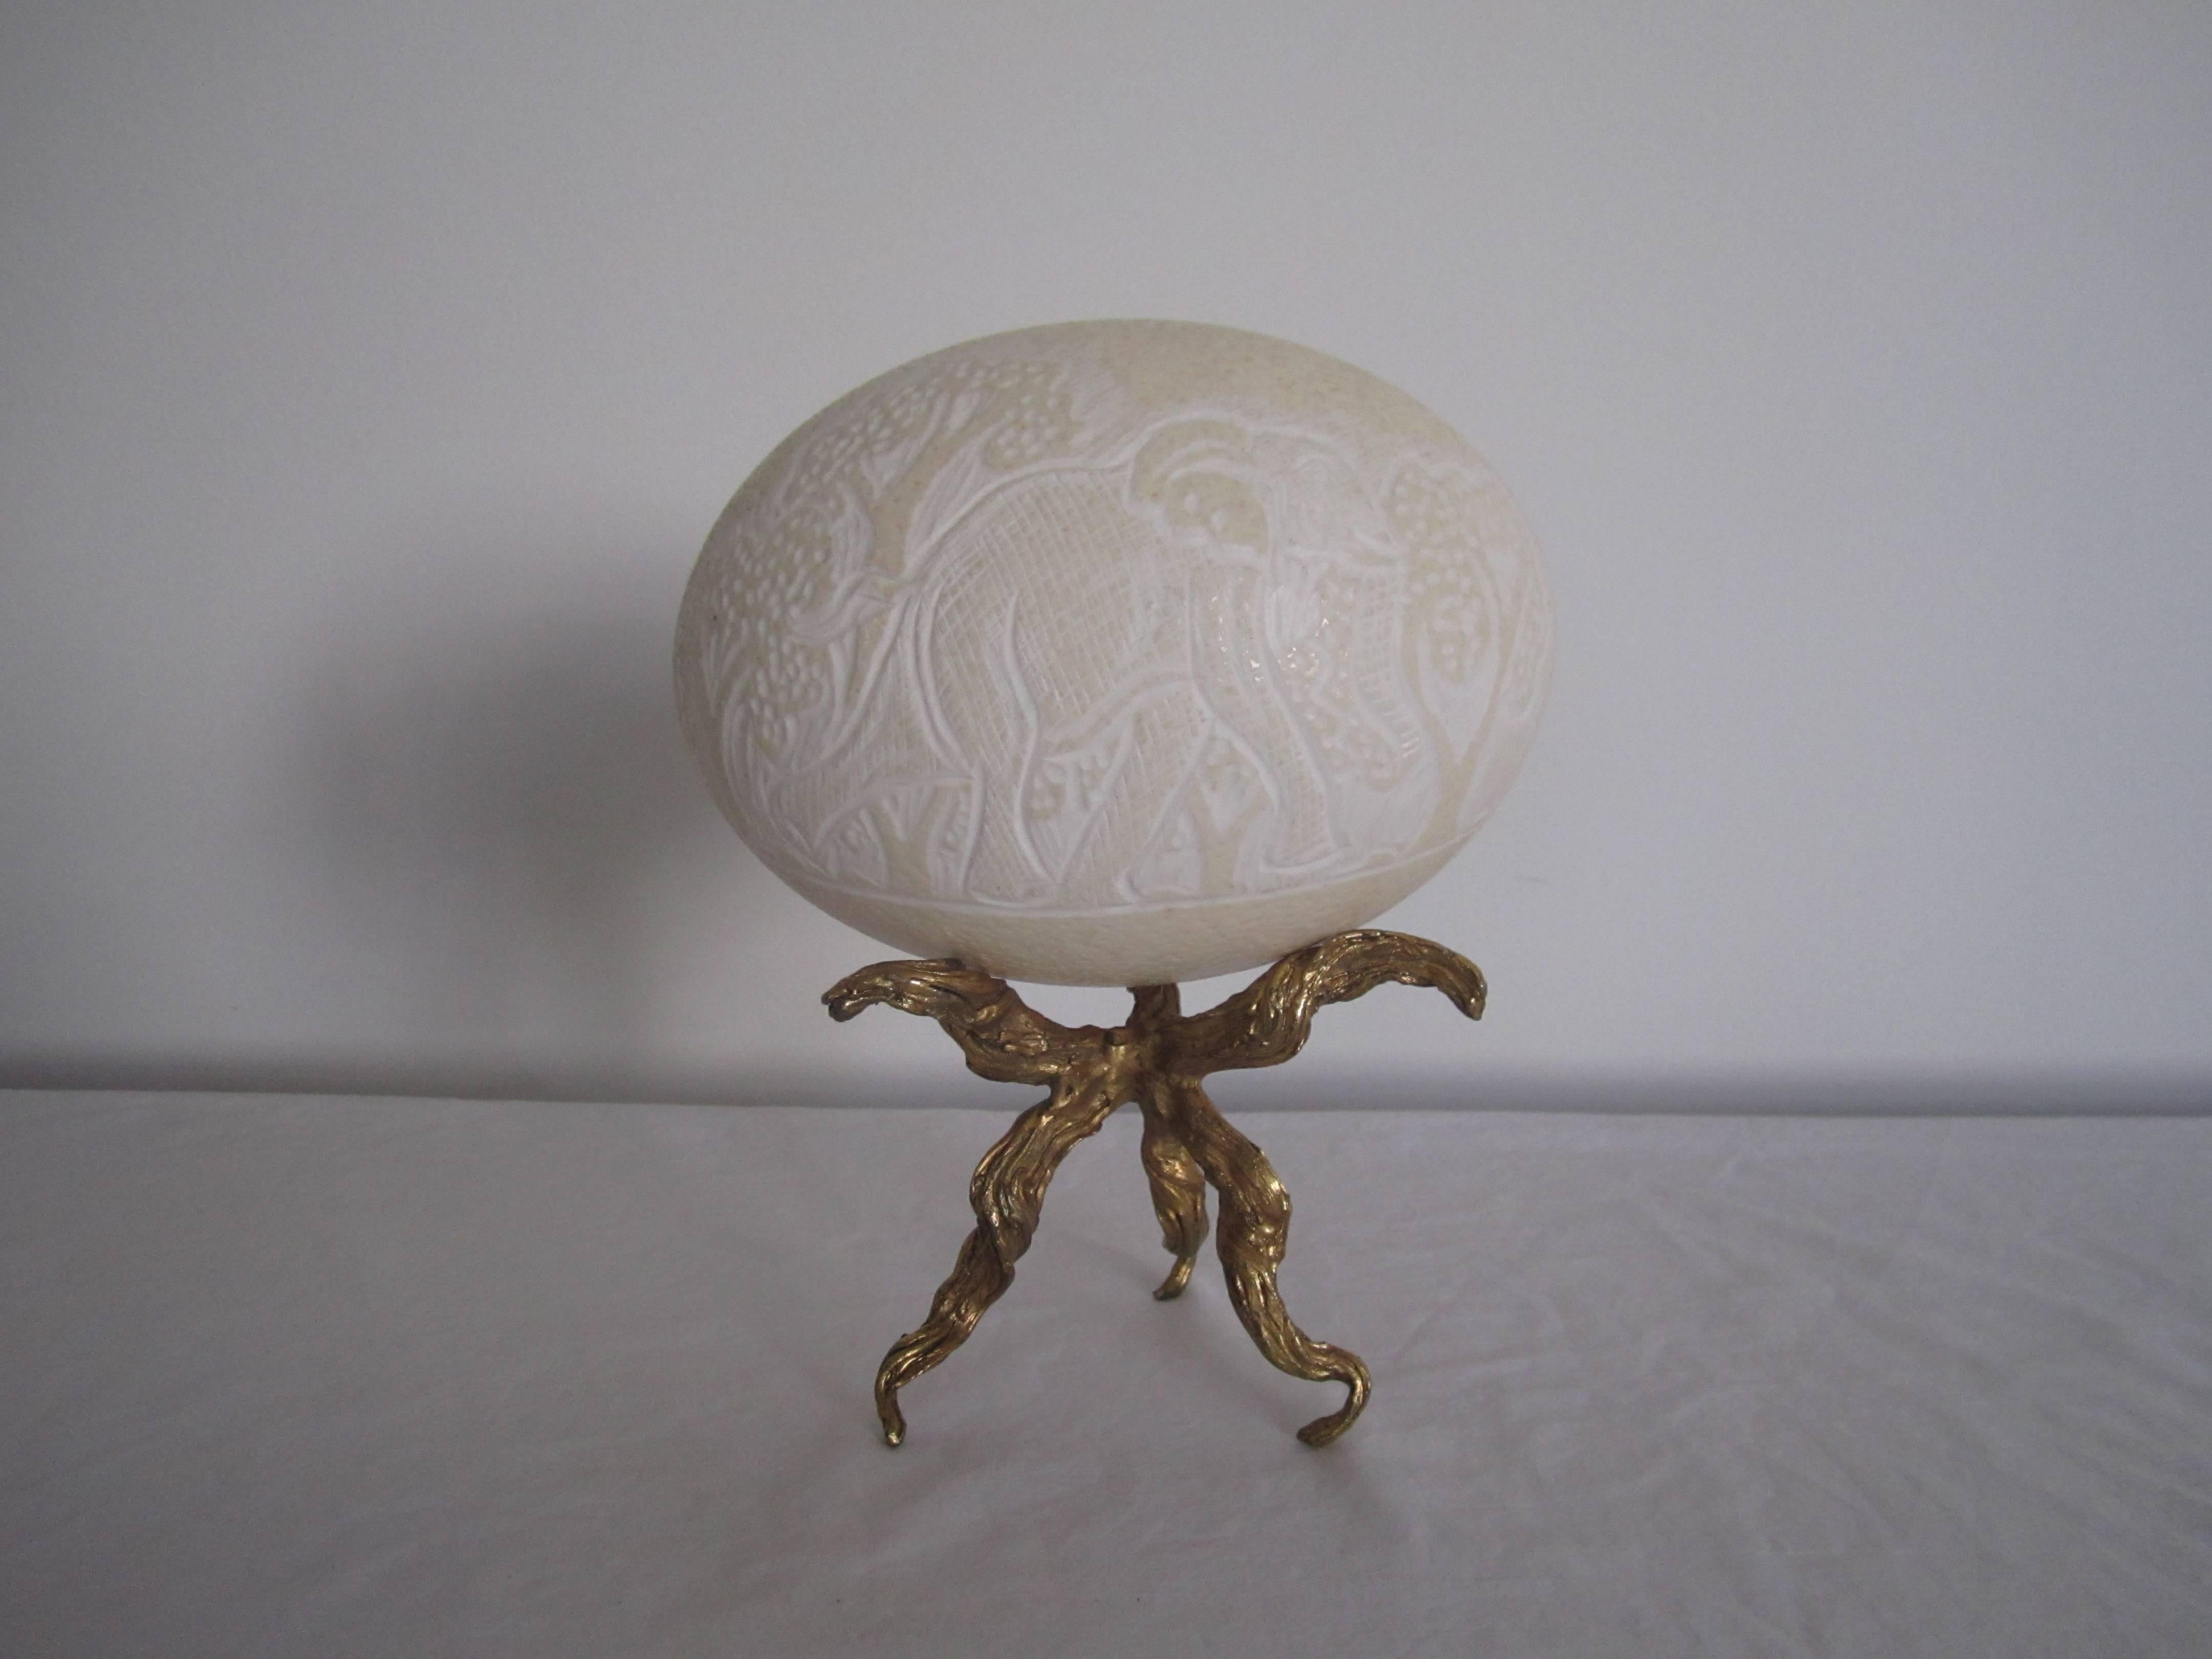 A carved ostrich egg; carved with an elephant on one side and a rhino on the other, sitting on a twisted metal gold base. Item available here online and by request, can be made available at my showcase space in the Showplace Antique + Design Center,